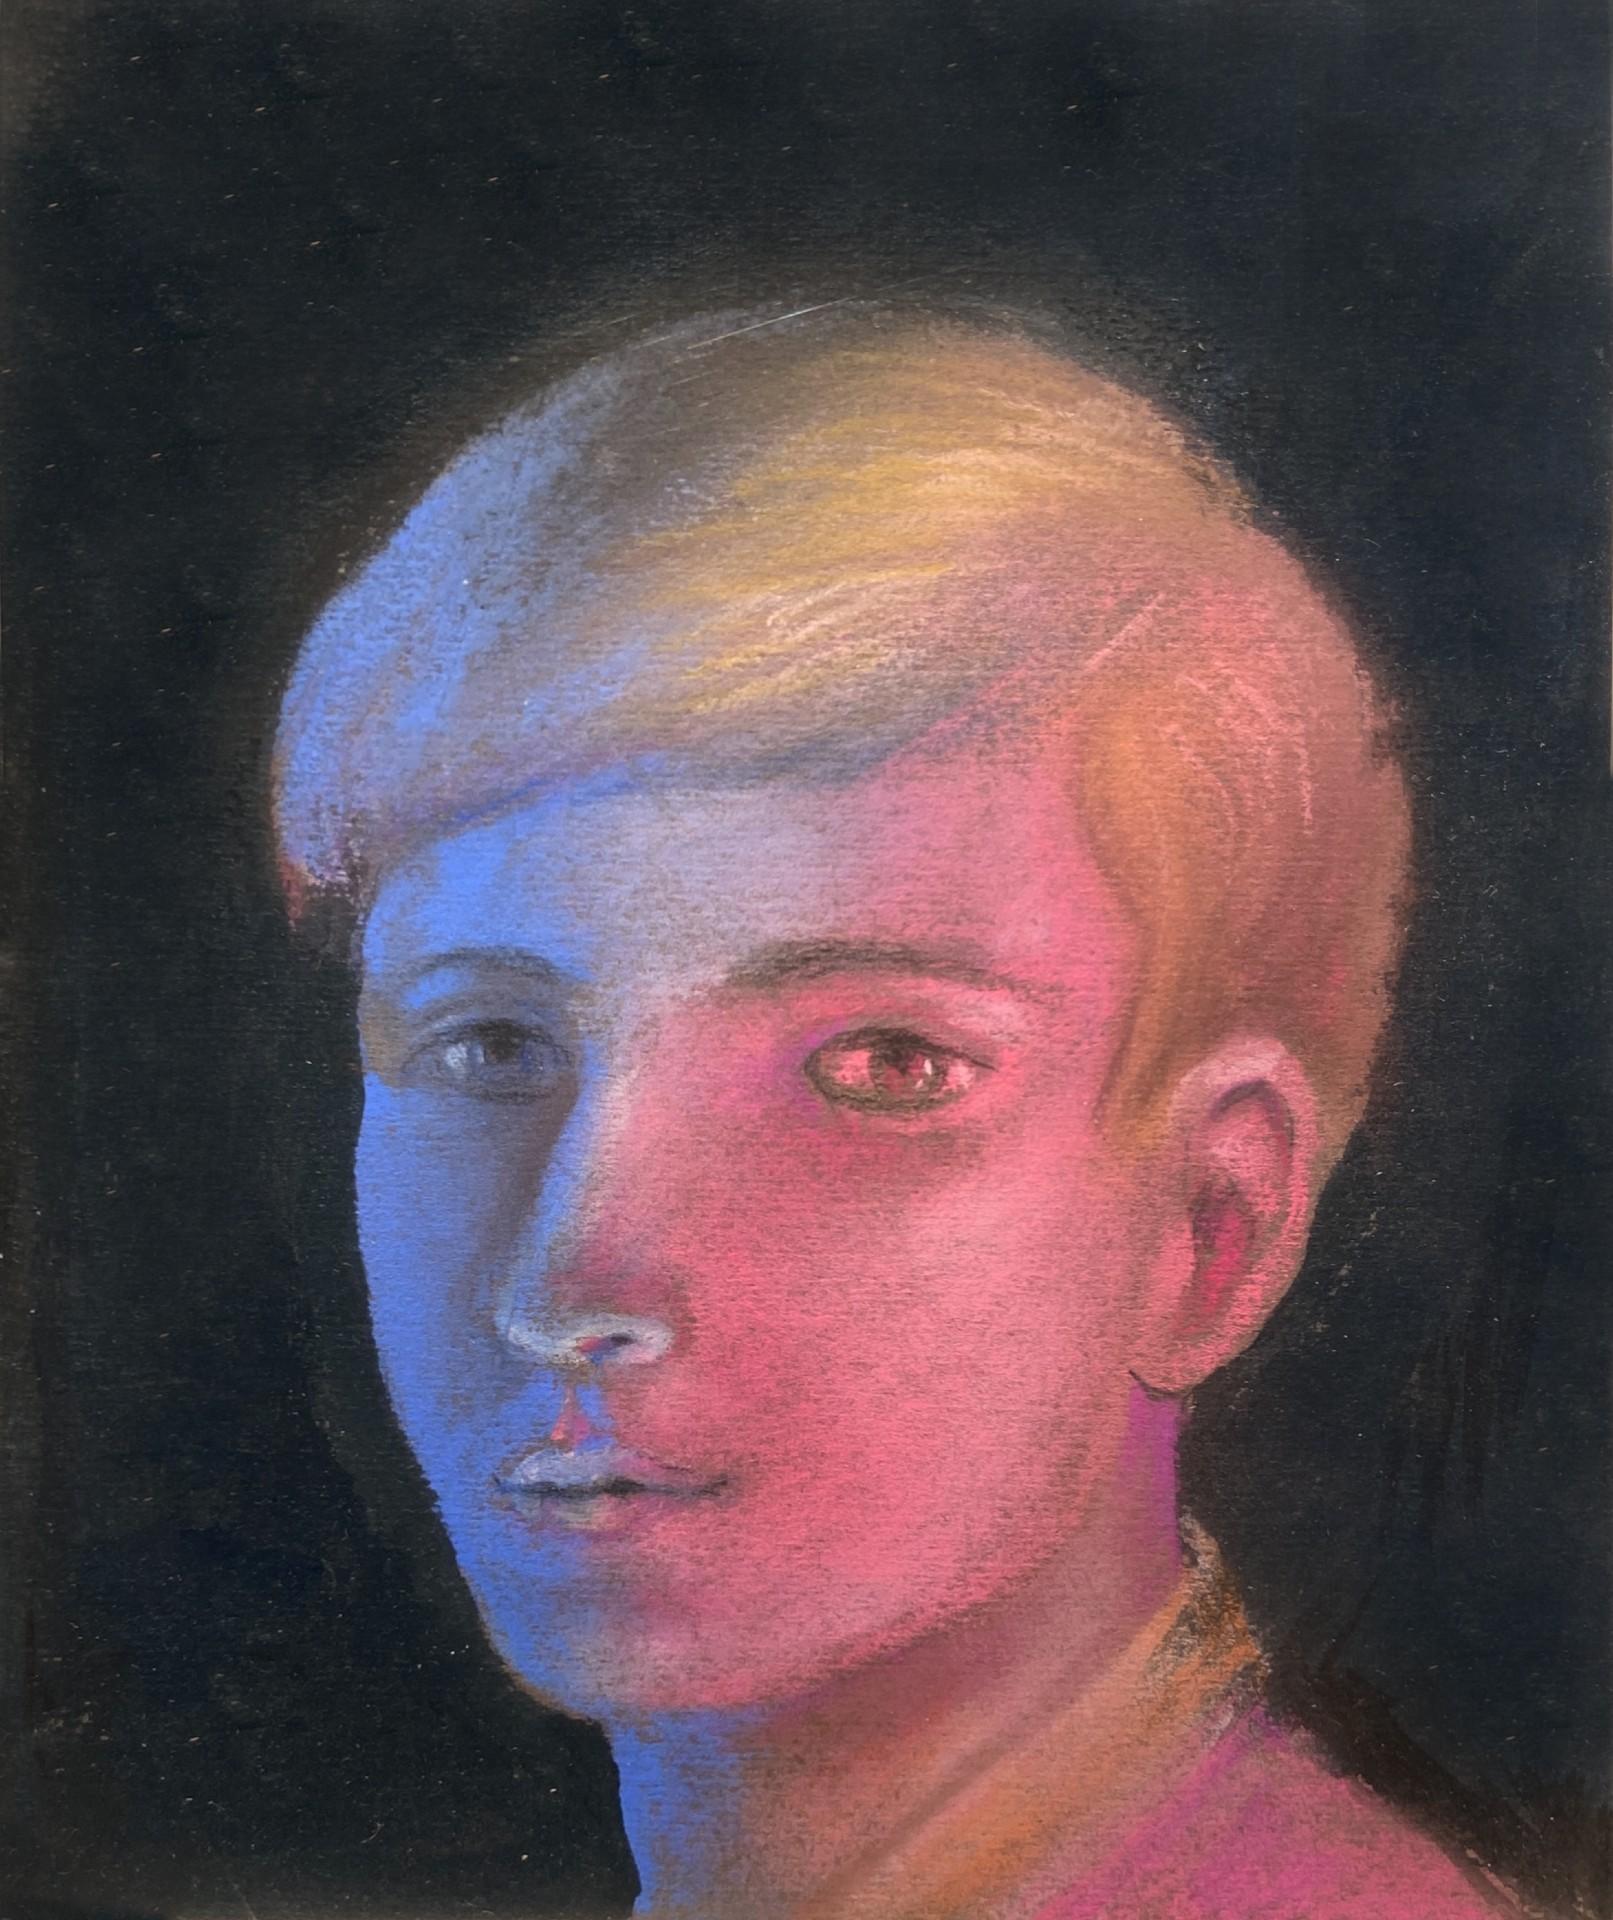 Pastel on paper
Image size: 6 x 7 inches (15.25 x 17.75 cm)
Mounted


Peter Gardner

Peter Gardner was born in London in 1921. He studied at the Hammersmith School of Art between 1935 and 1938, before serving in Italy and in the European campaign